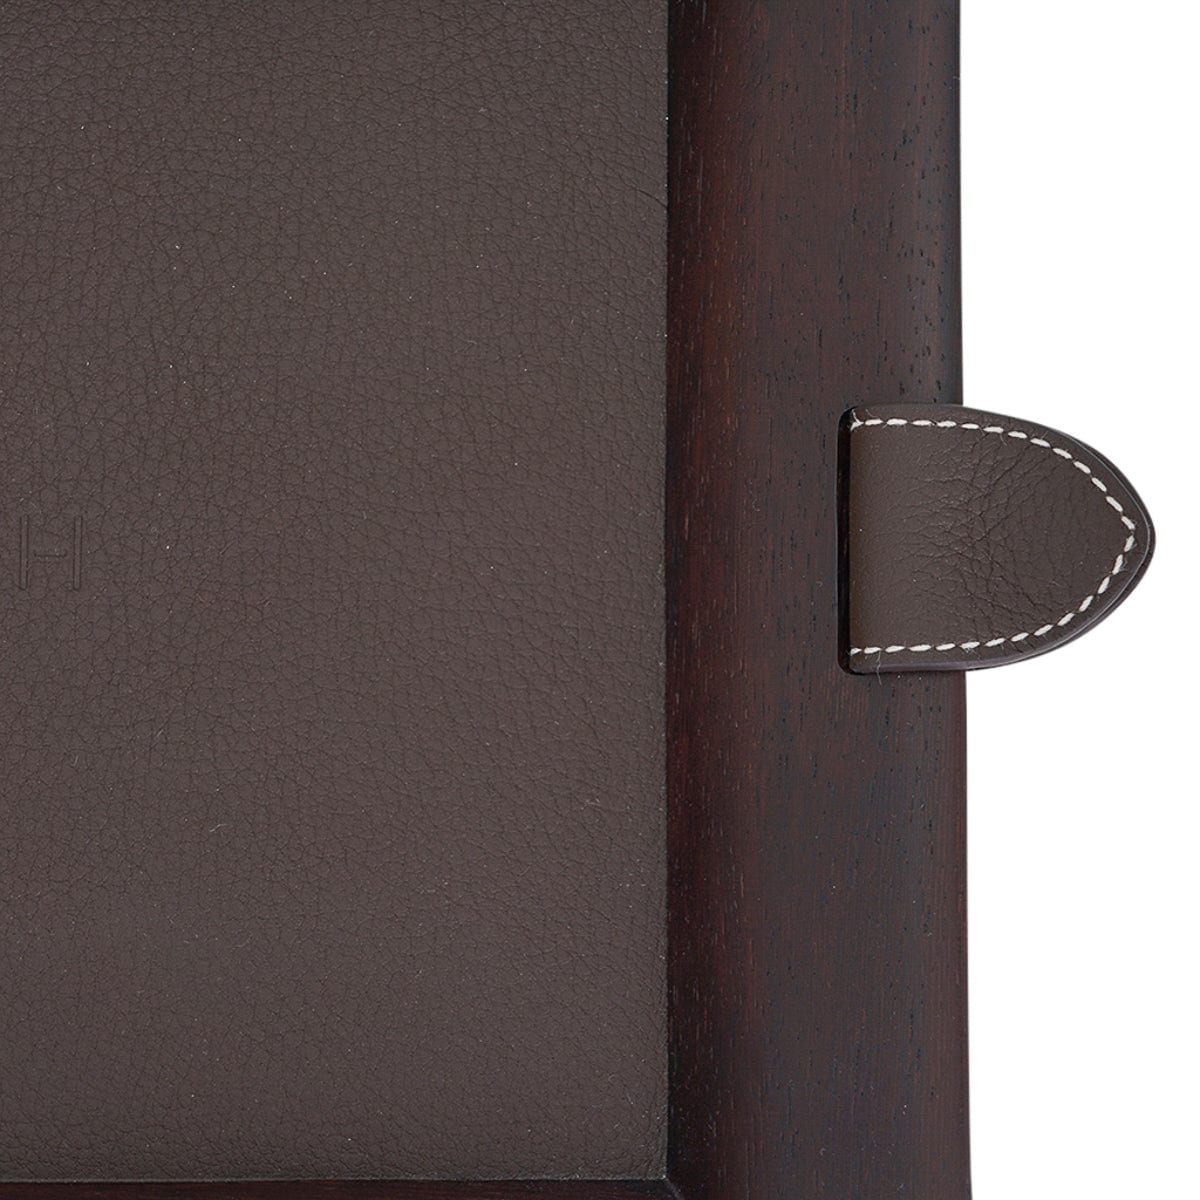 Hermes Chakor Change Tray Square Wood and Leather Center – Mightychic